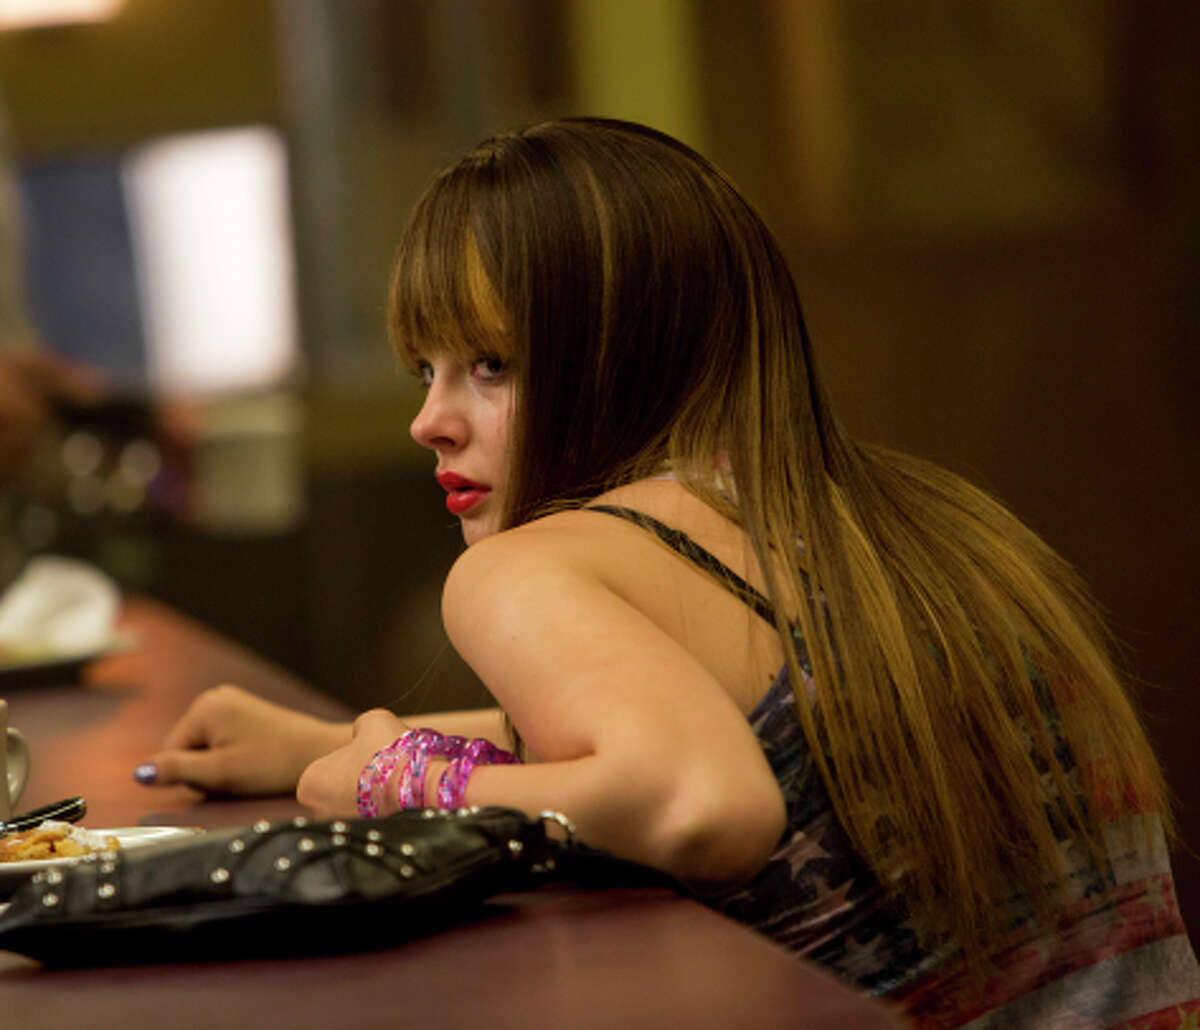 Teri (Chloë Grace Moretz) is a girl forced into prostitution, and in need of rescue, in “The Equalizer.”